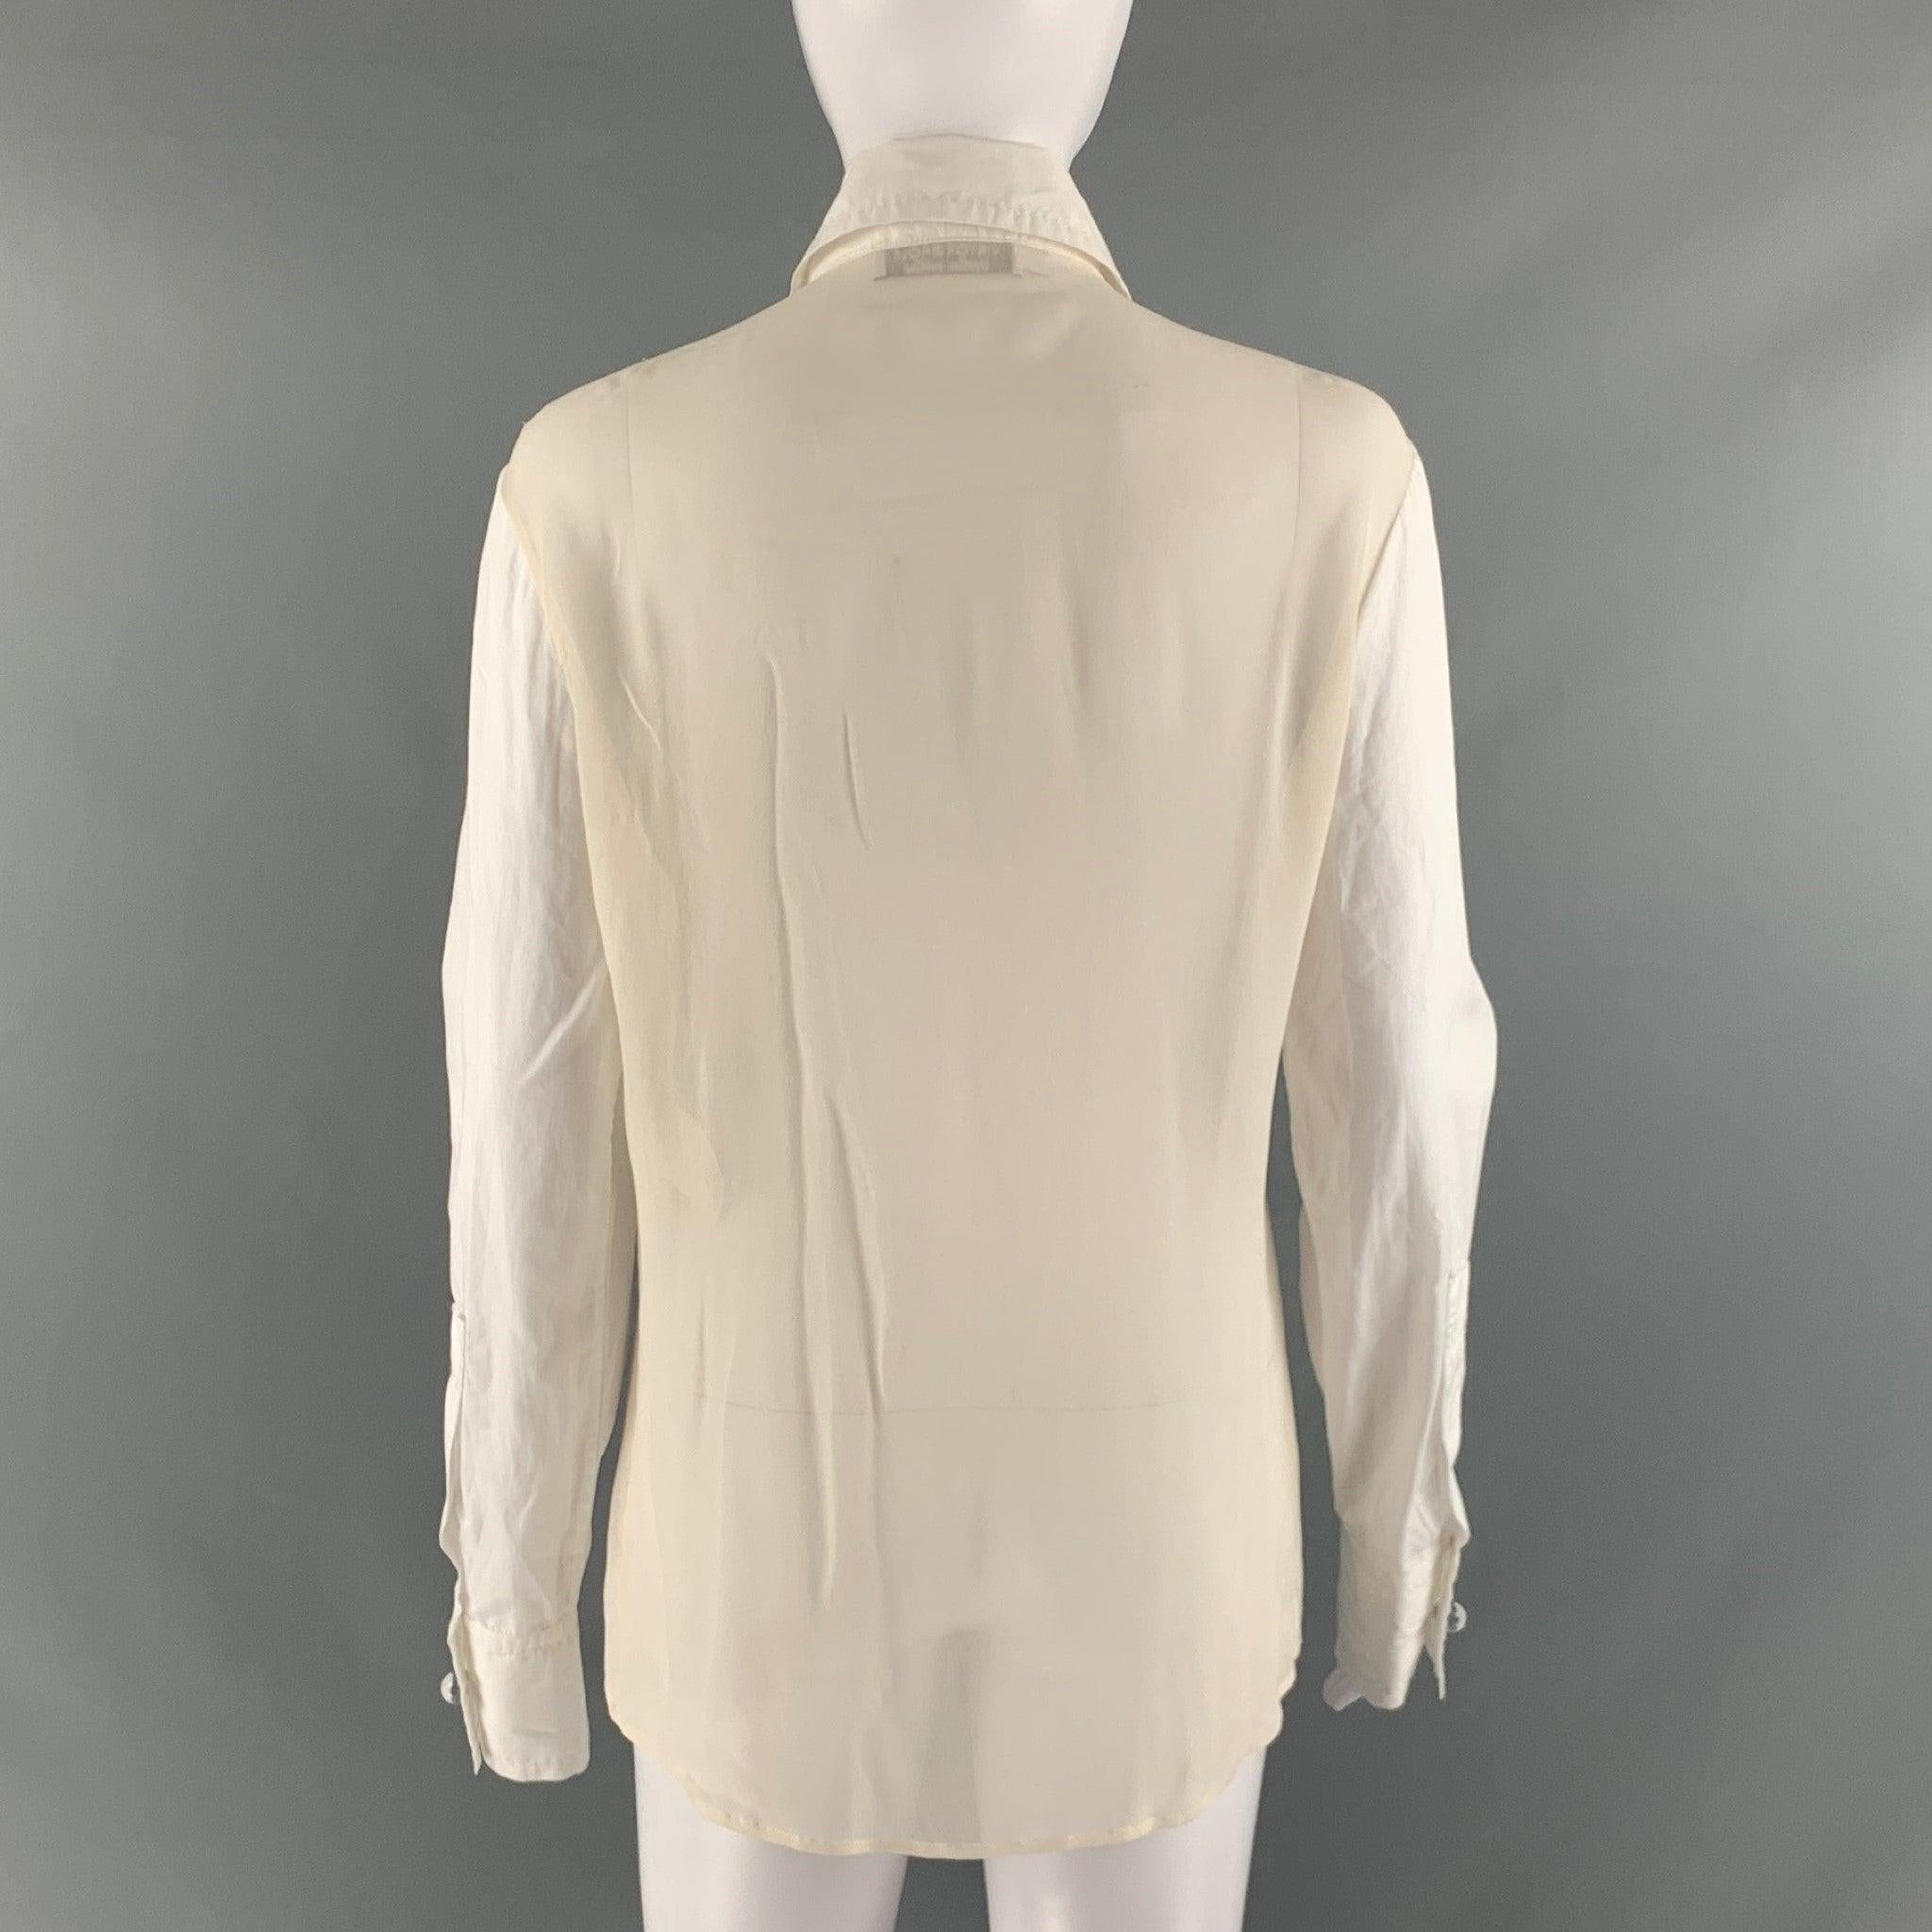 VIKTOR & ROLF Size 6 White Beige Cotton Fringe Button Up Blouse In Excellent Condition For Sale In San Francisco, CA